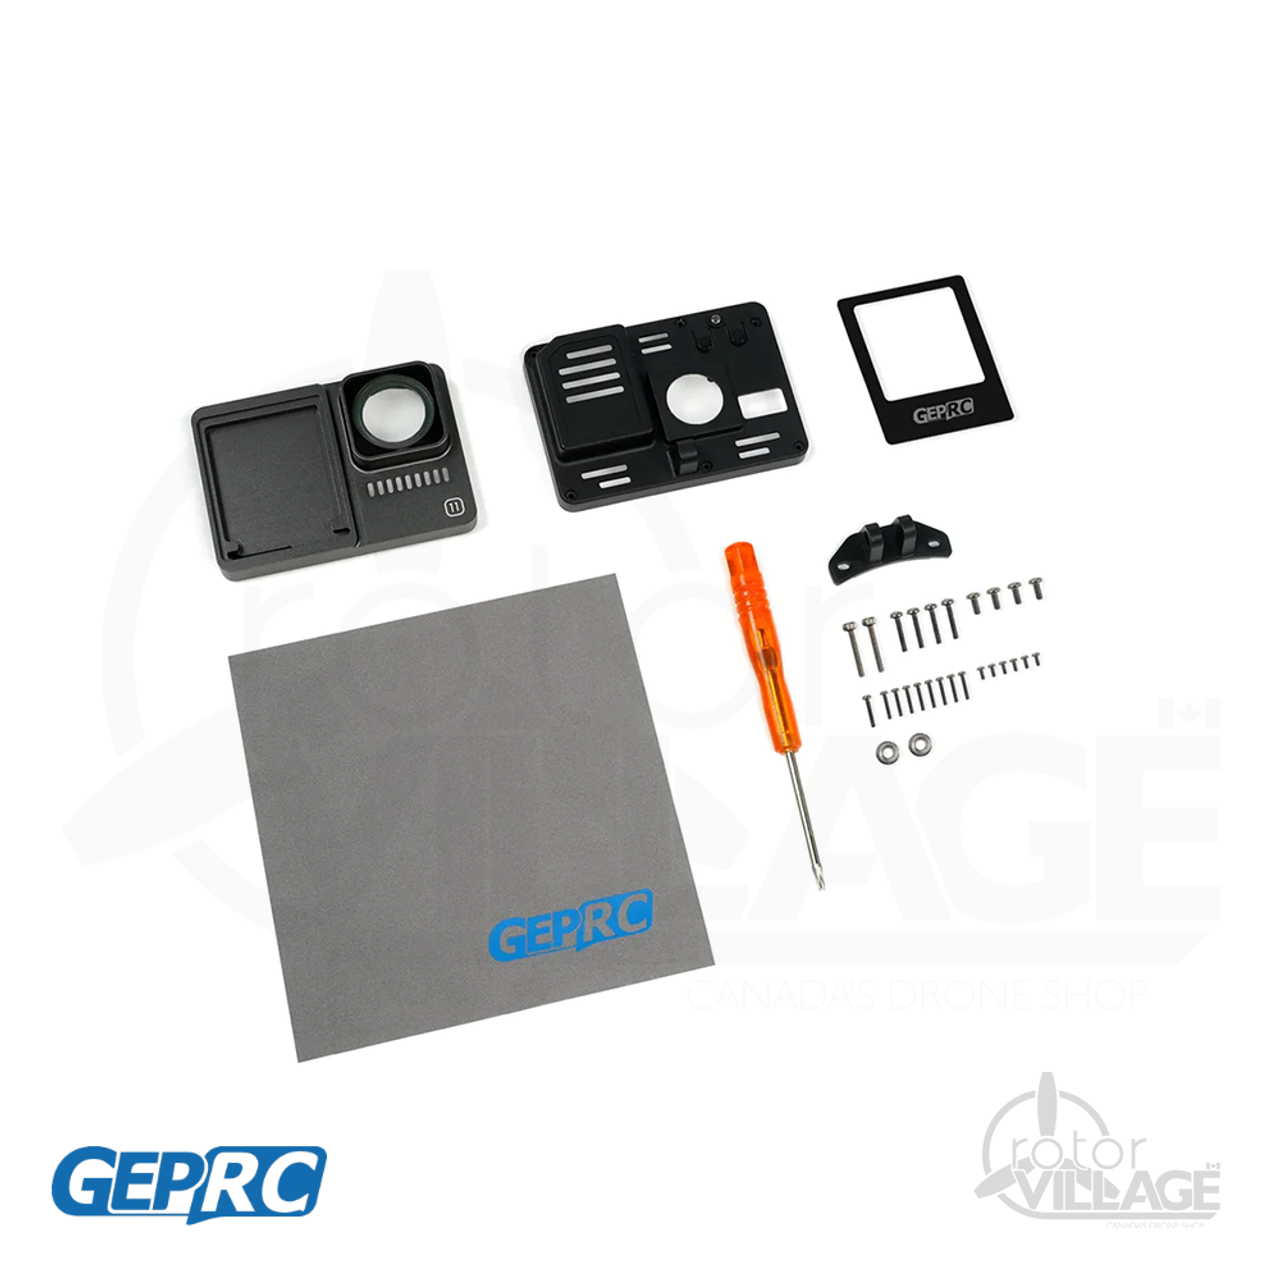 GEPRC Naked GoPro Hero 11 Case with BEC Board - Rotor Village